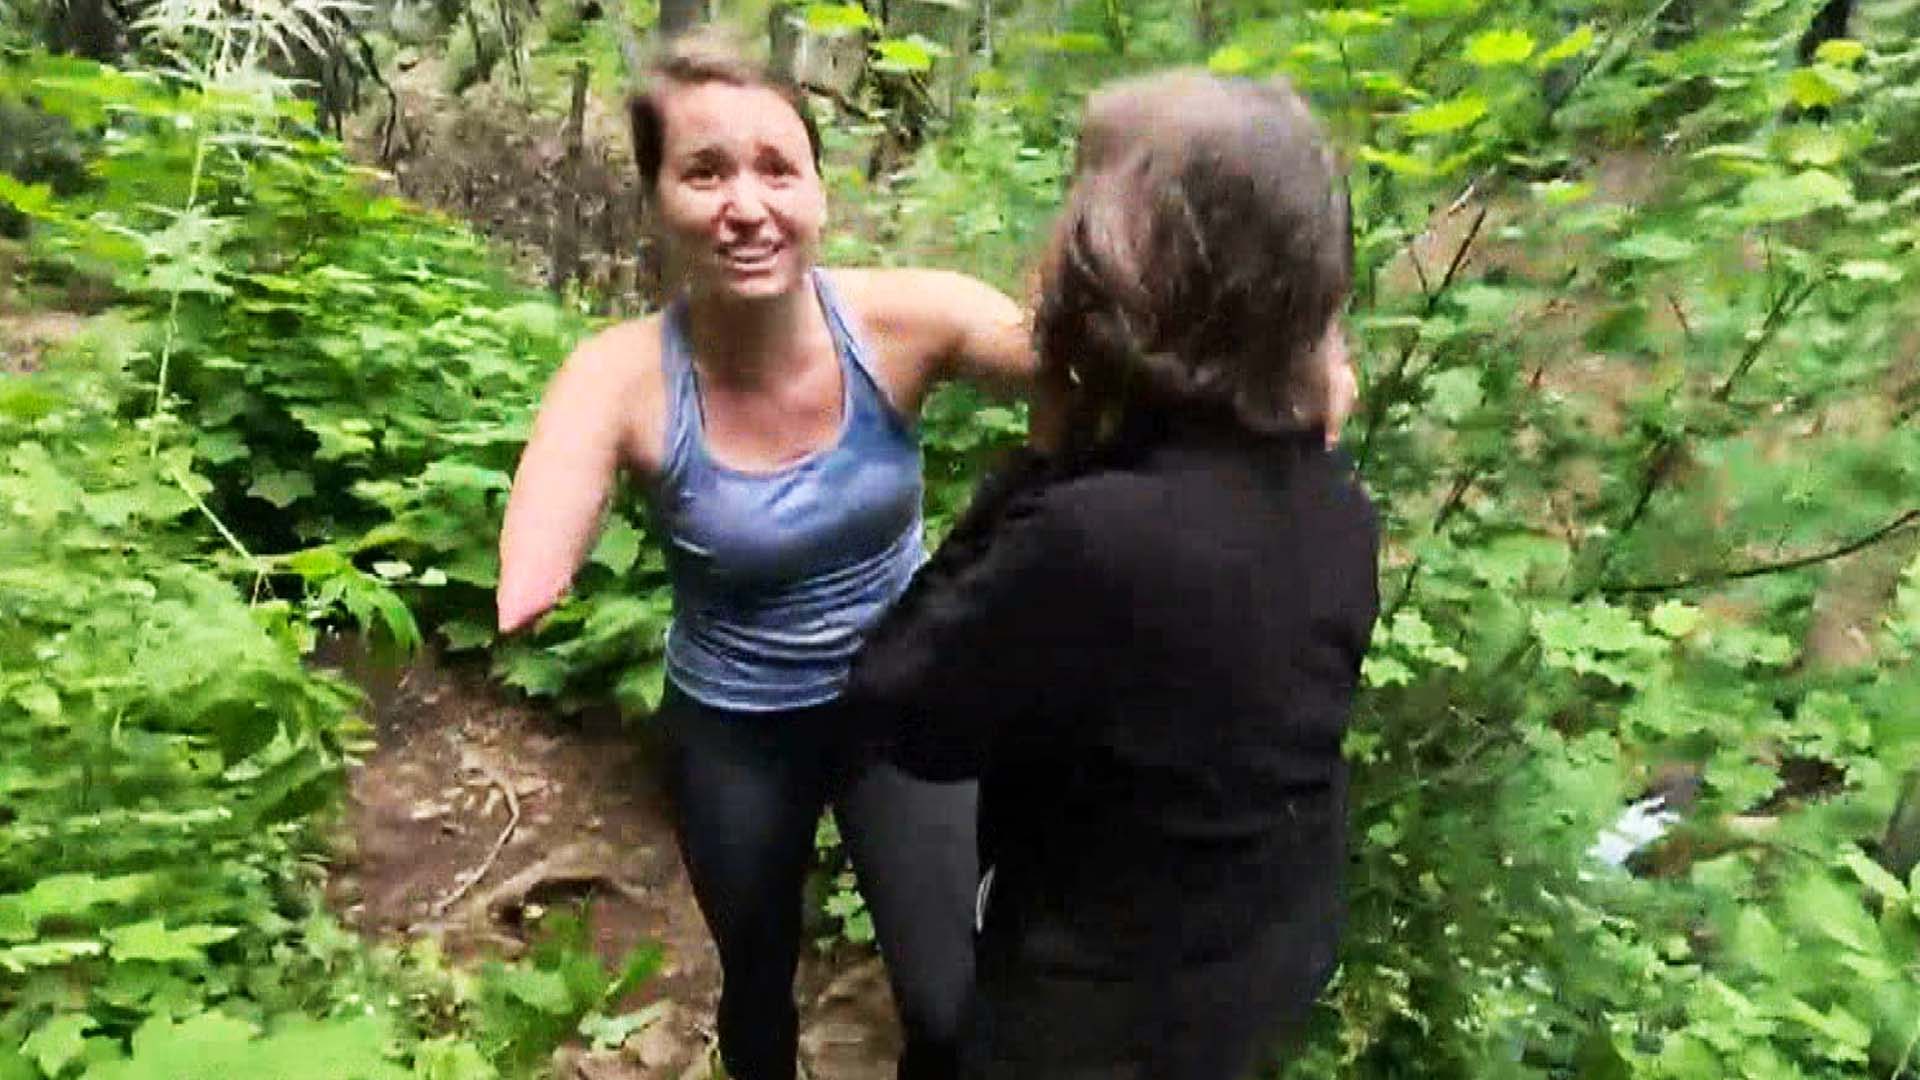 Hiker Saves Woman Who Fell While Hiking With One-Armed Daughter